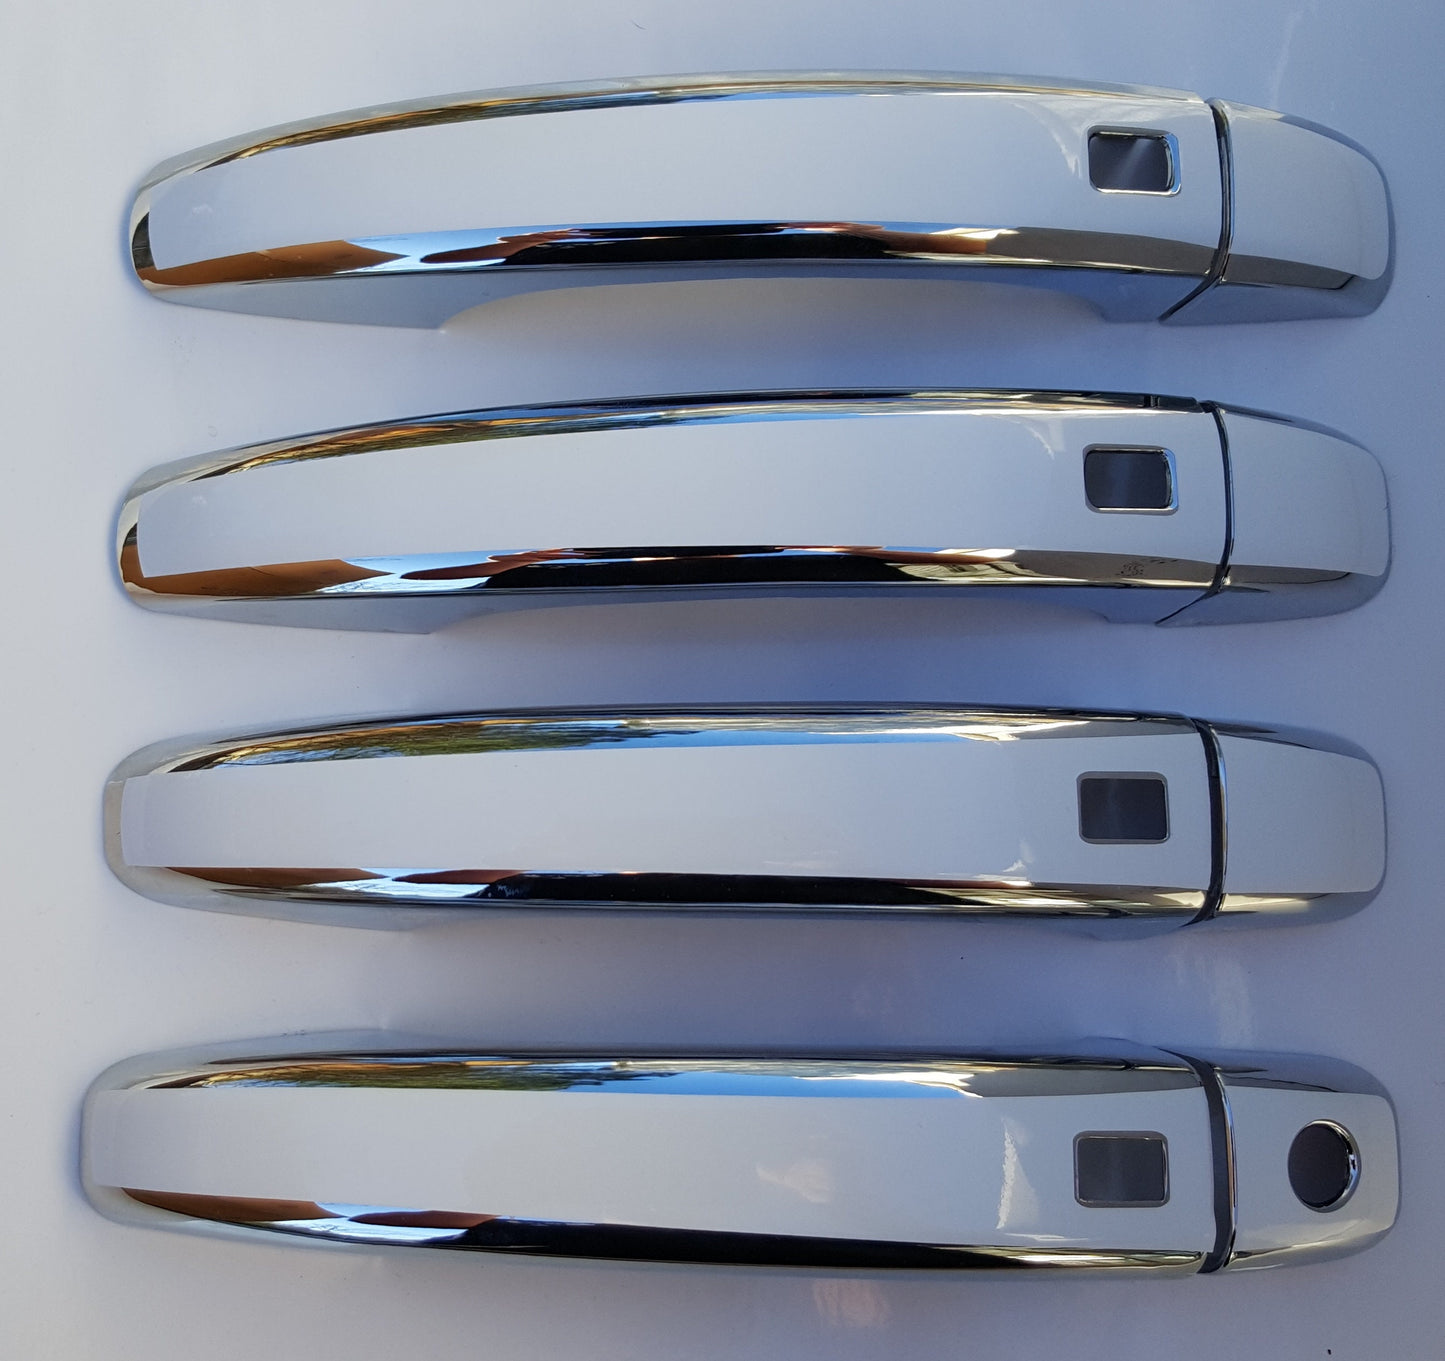 Full Set of Custom Chrome Door Handle Overlays / Covers For the 2008 – 2015 Audi A4 -- You Choose the Middle Color Insert